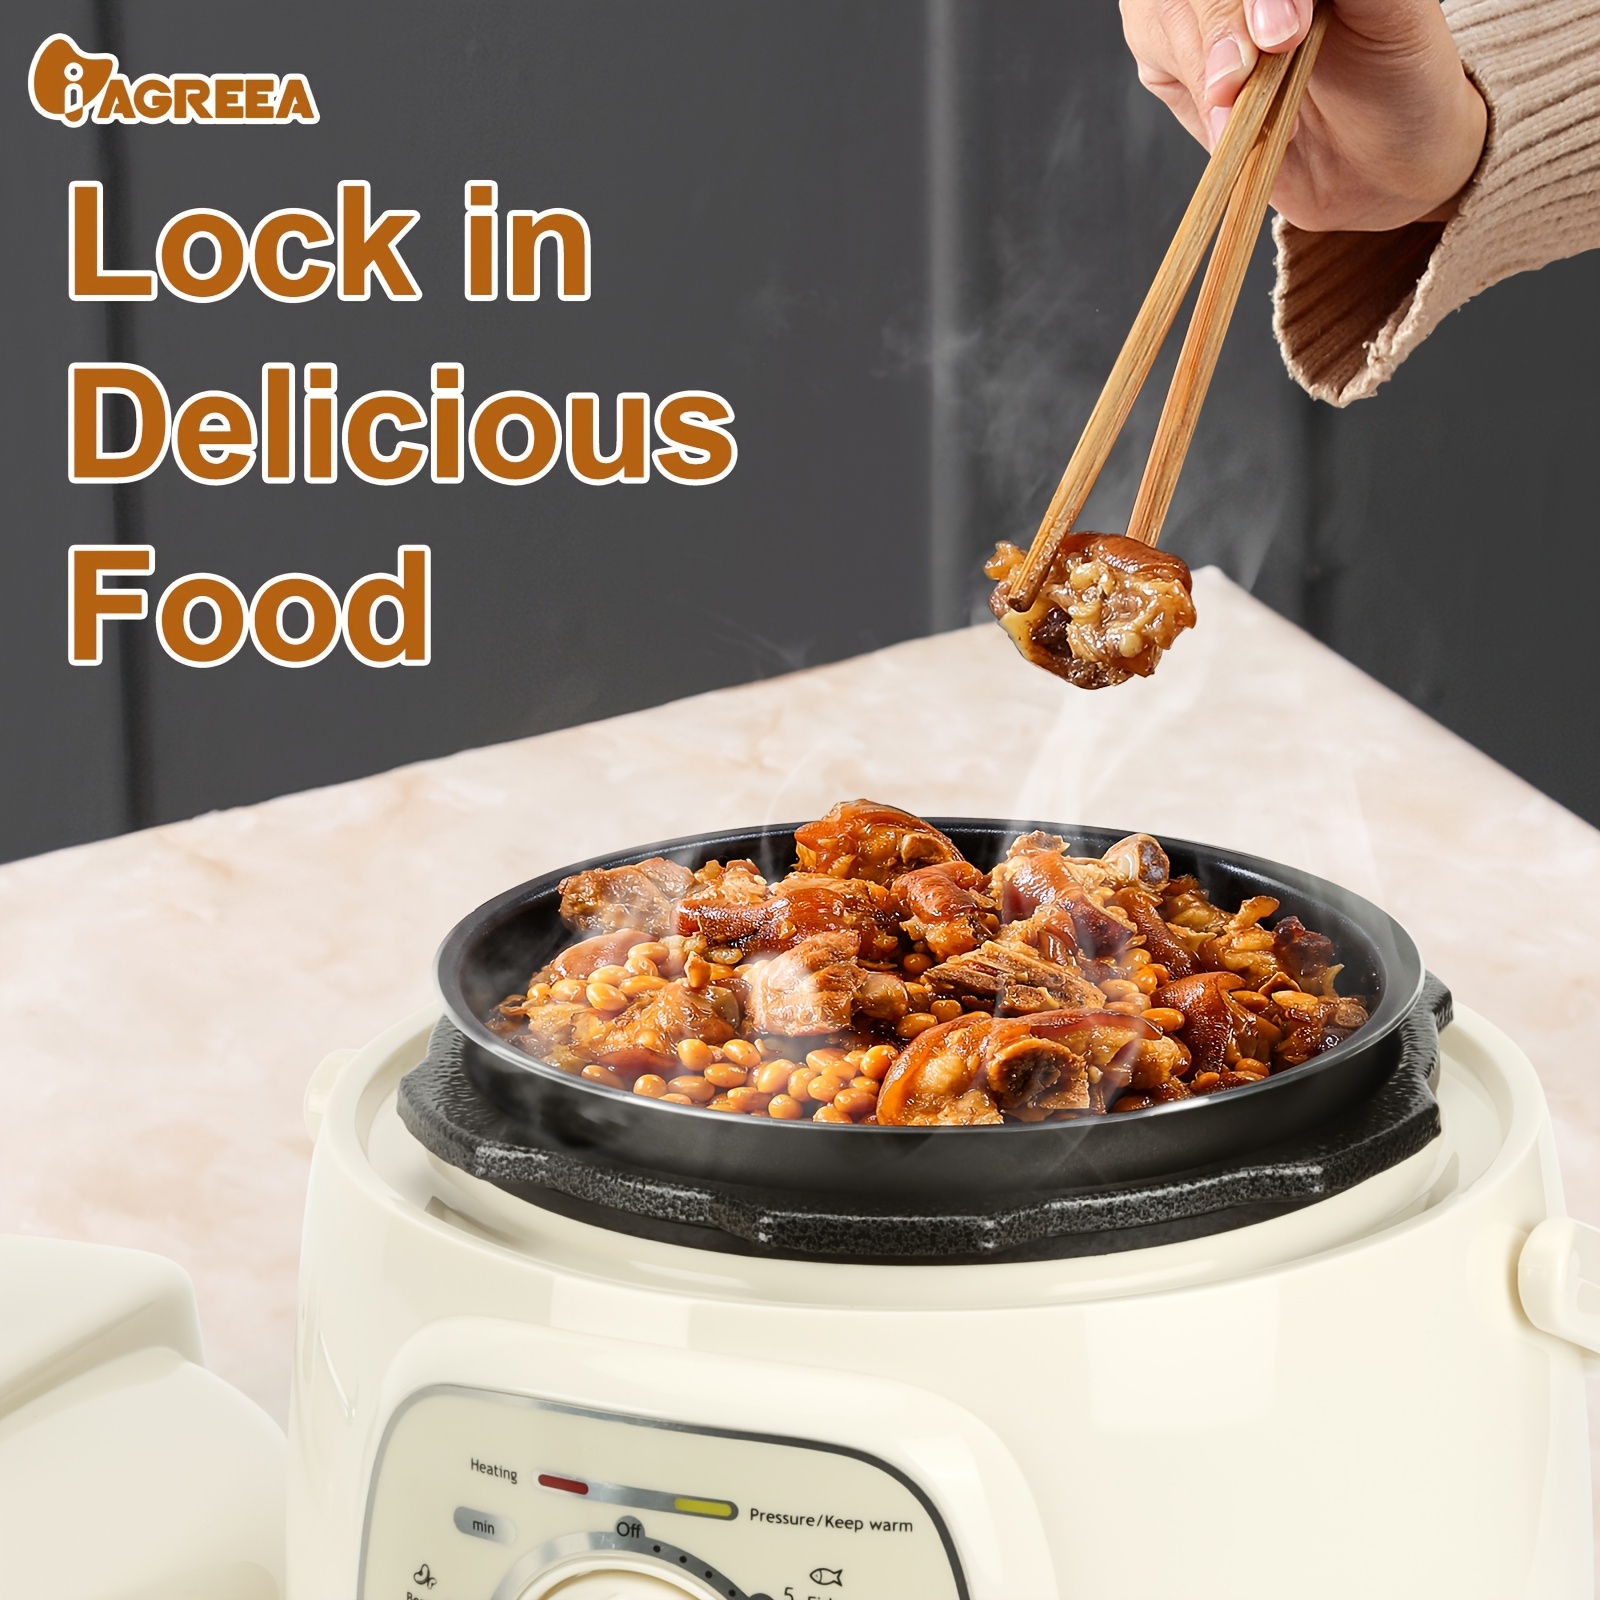 Electric Pressure & Slow Cookers for Rice & More